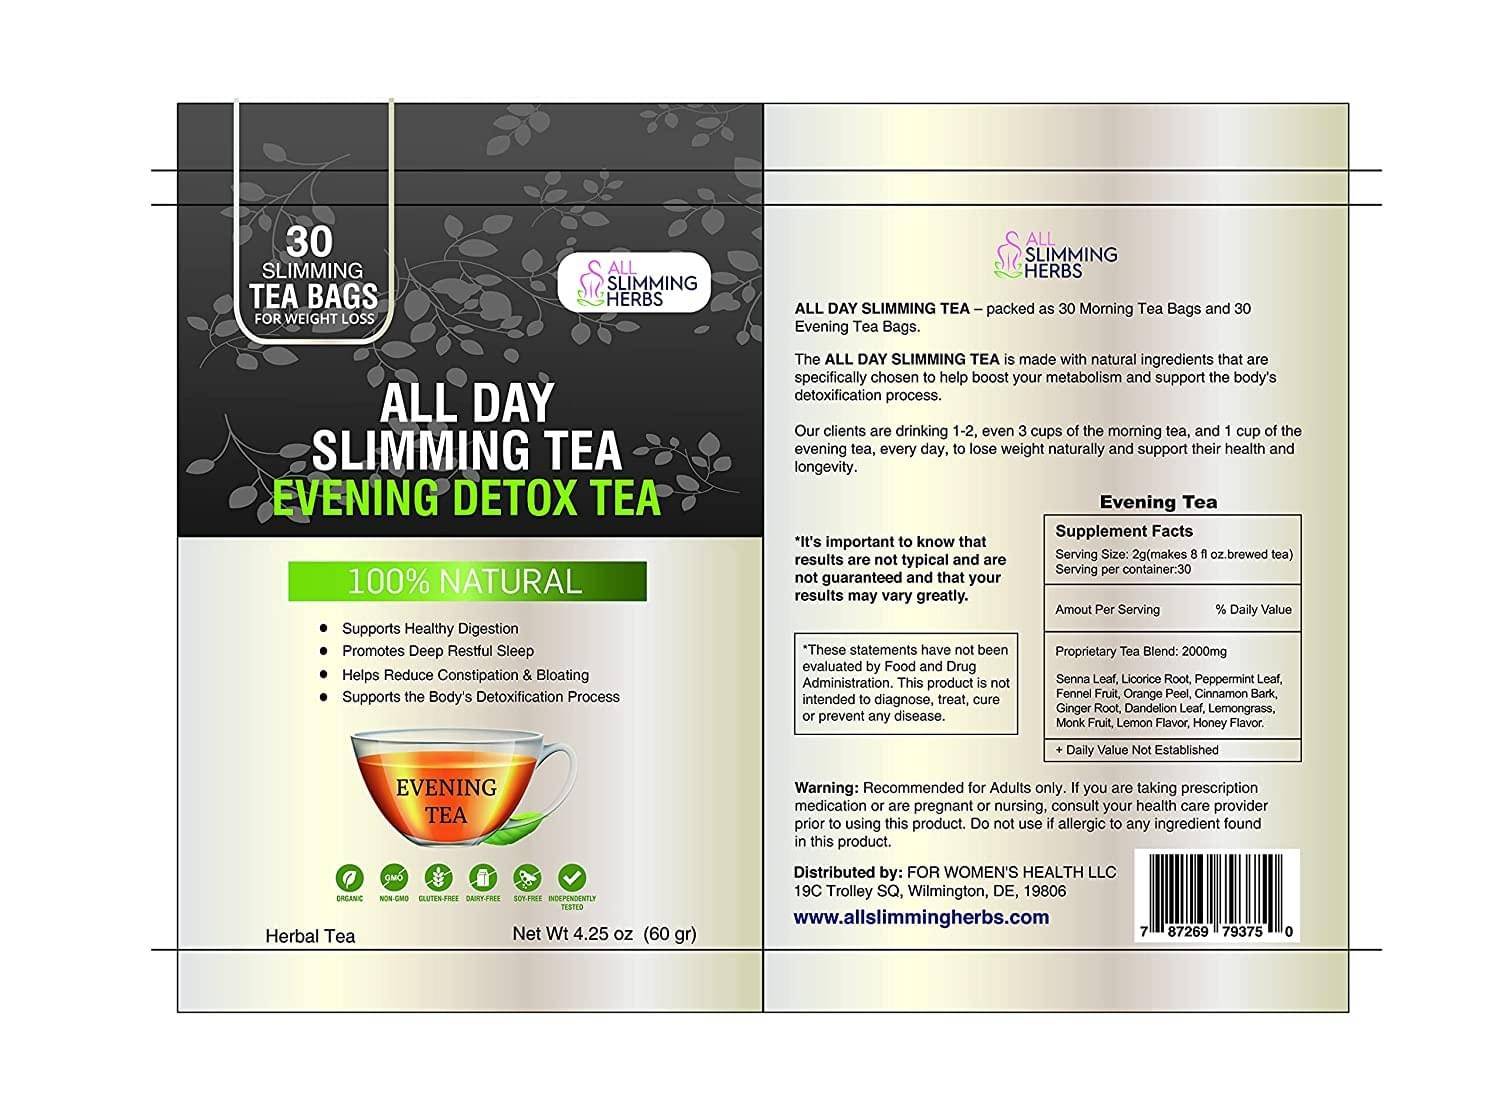 All-Day Slimming Tea Supplement Facts